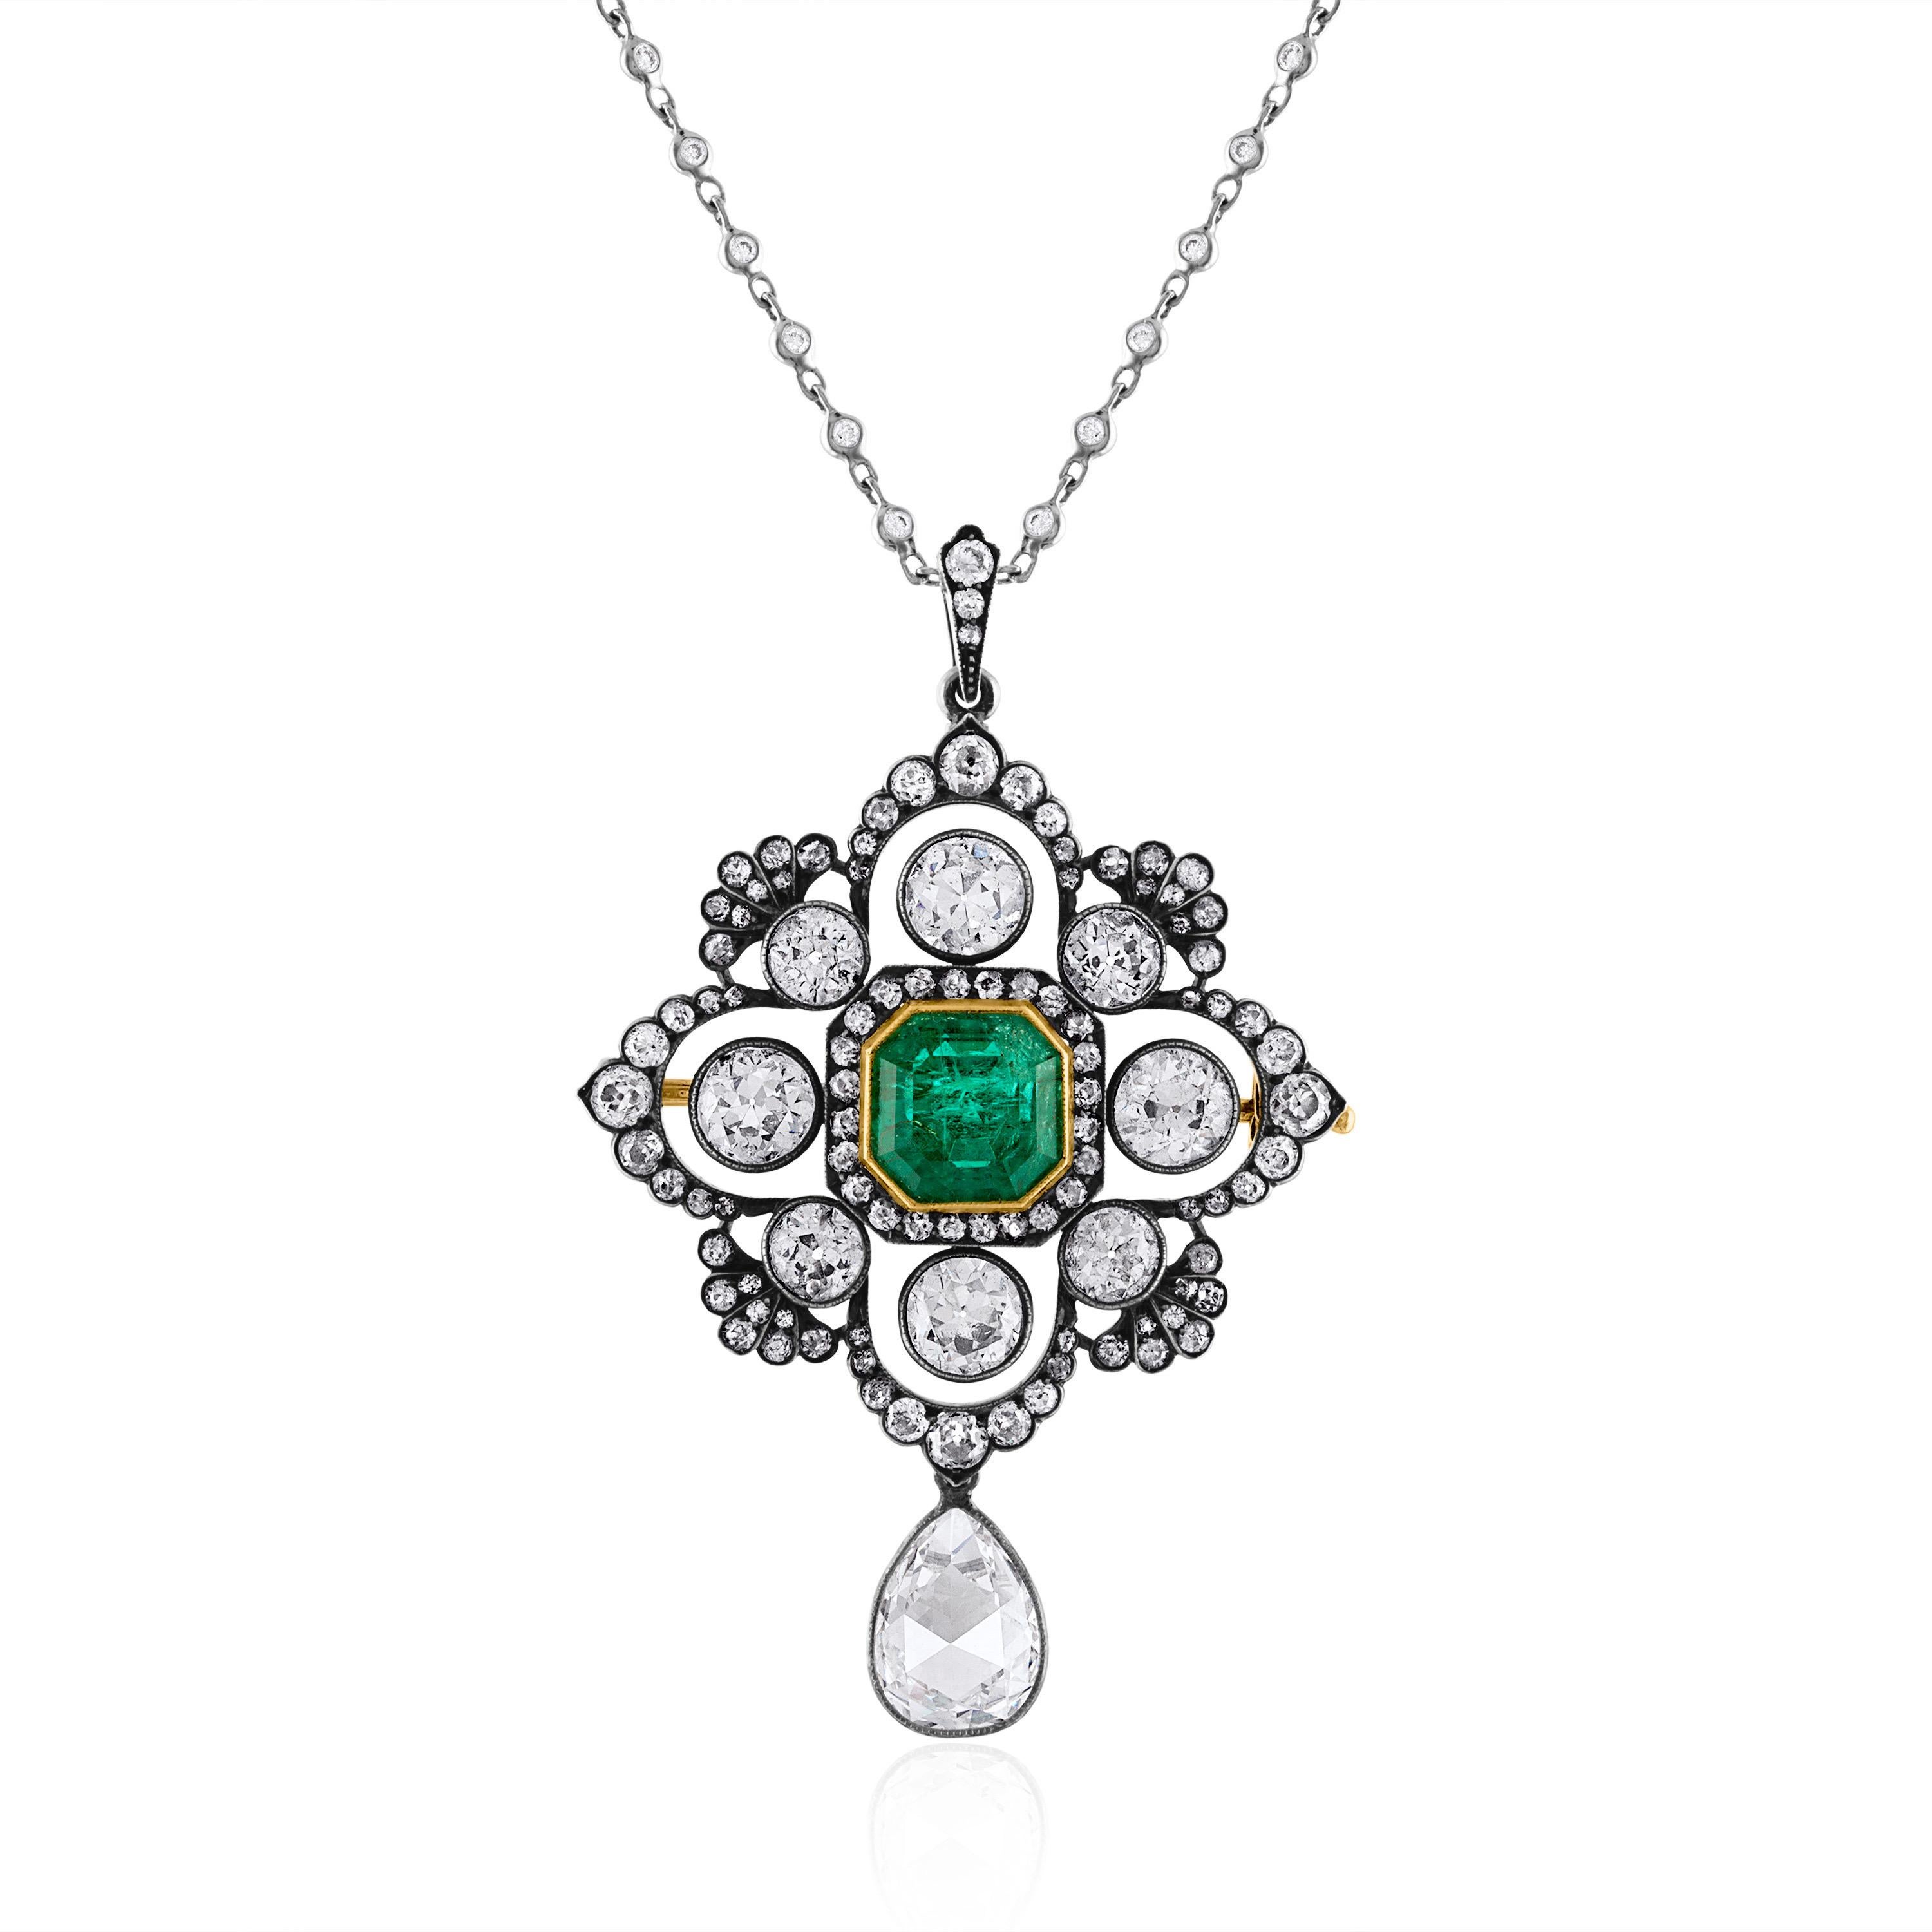 Women's or Men's  Victorian 4.26 Carat Colombian Emerald and 8.49 Carat Diamond Pendant Brooch For Sale